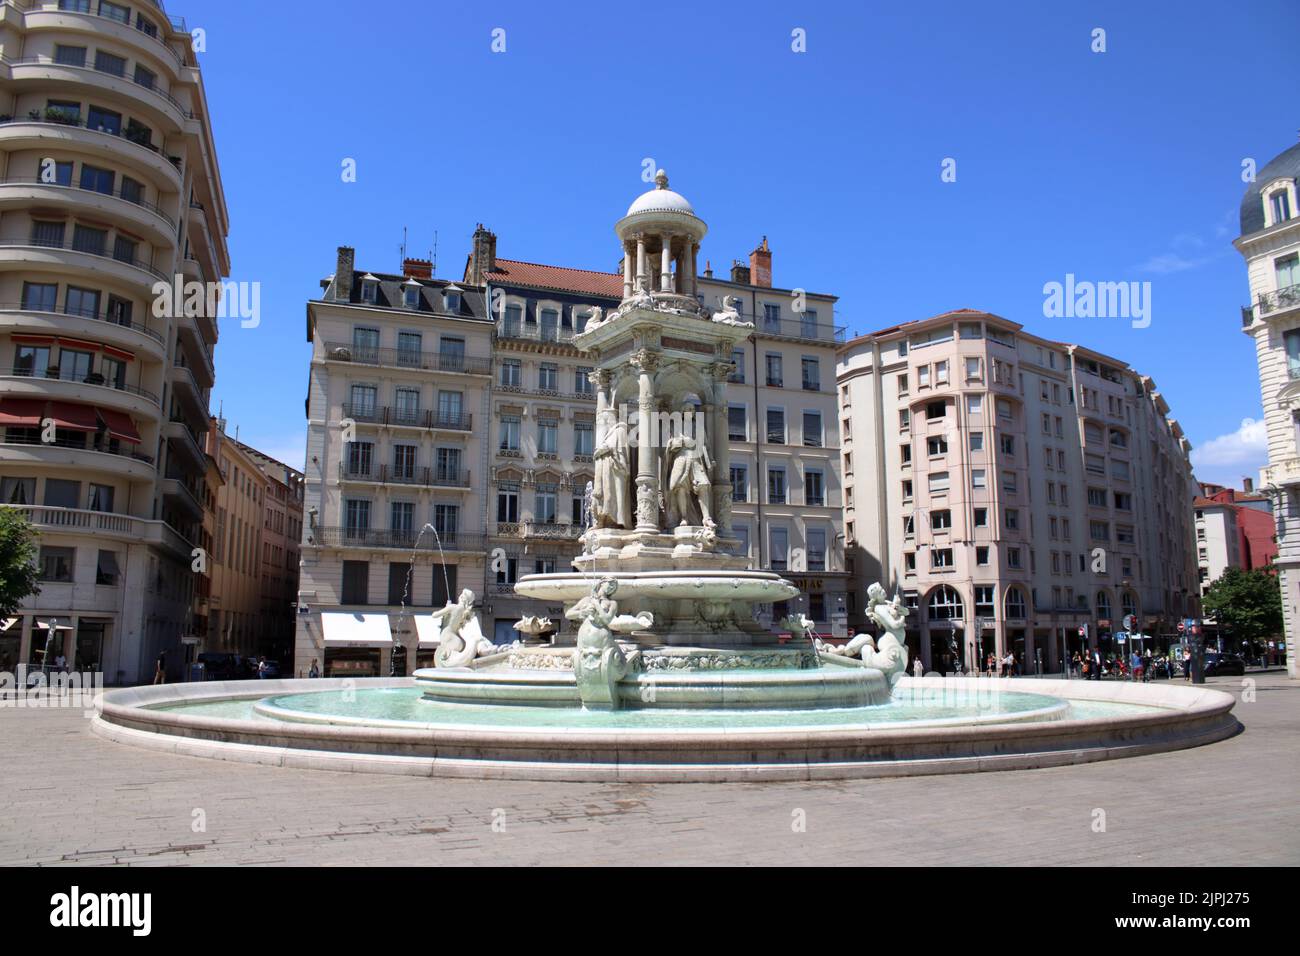 Water fountain on the Place des Jacobins in central Lyon sculpted by the famous french sculptor Charles Degeorge in the 19th century. Stock Photo